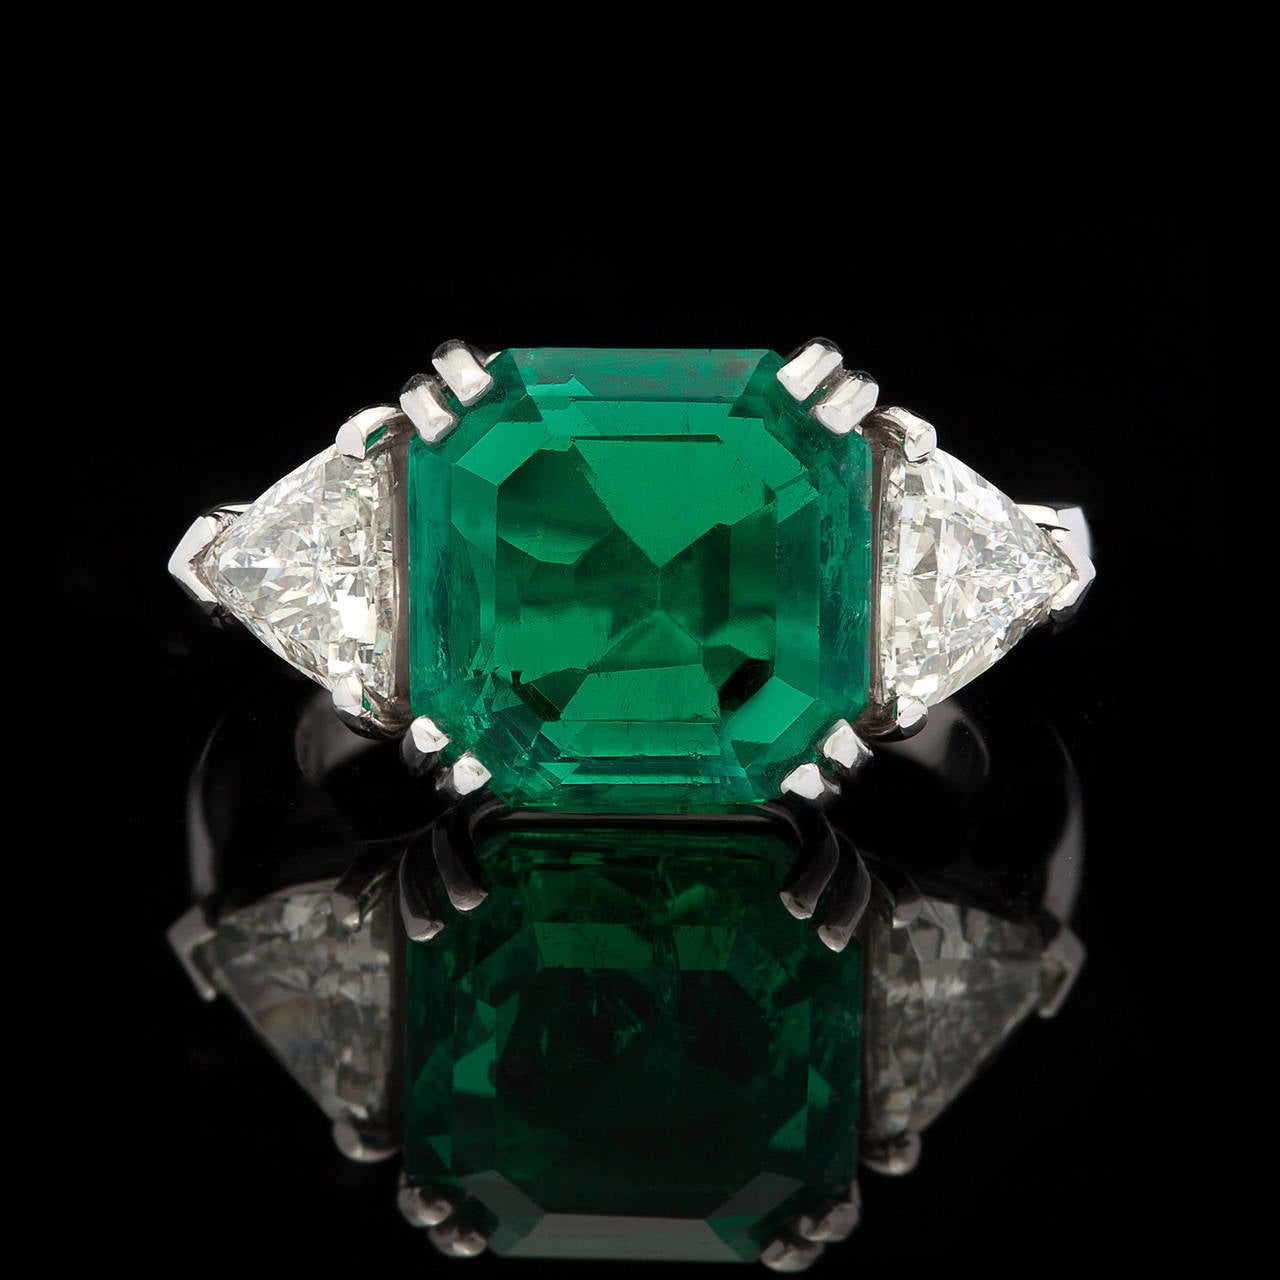 Platinum Ring with 5.40ct Green Square Emerald Cut Colombian Emerald Flanked by 2 Triangular Brilliant Cut Diamonds for approximately 1.20cts. The ring is a size 5.75 and weighs 10.7 grams. AGL report #CS 62144 is included.